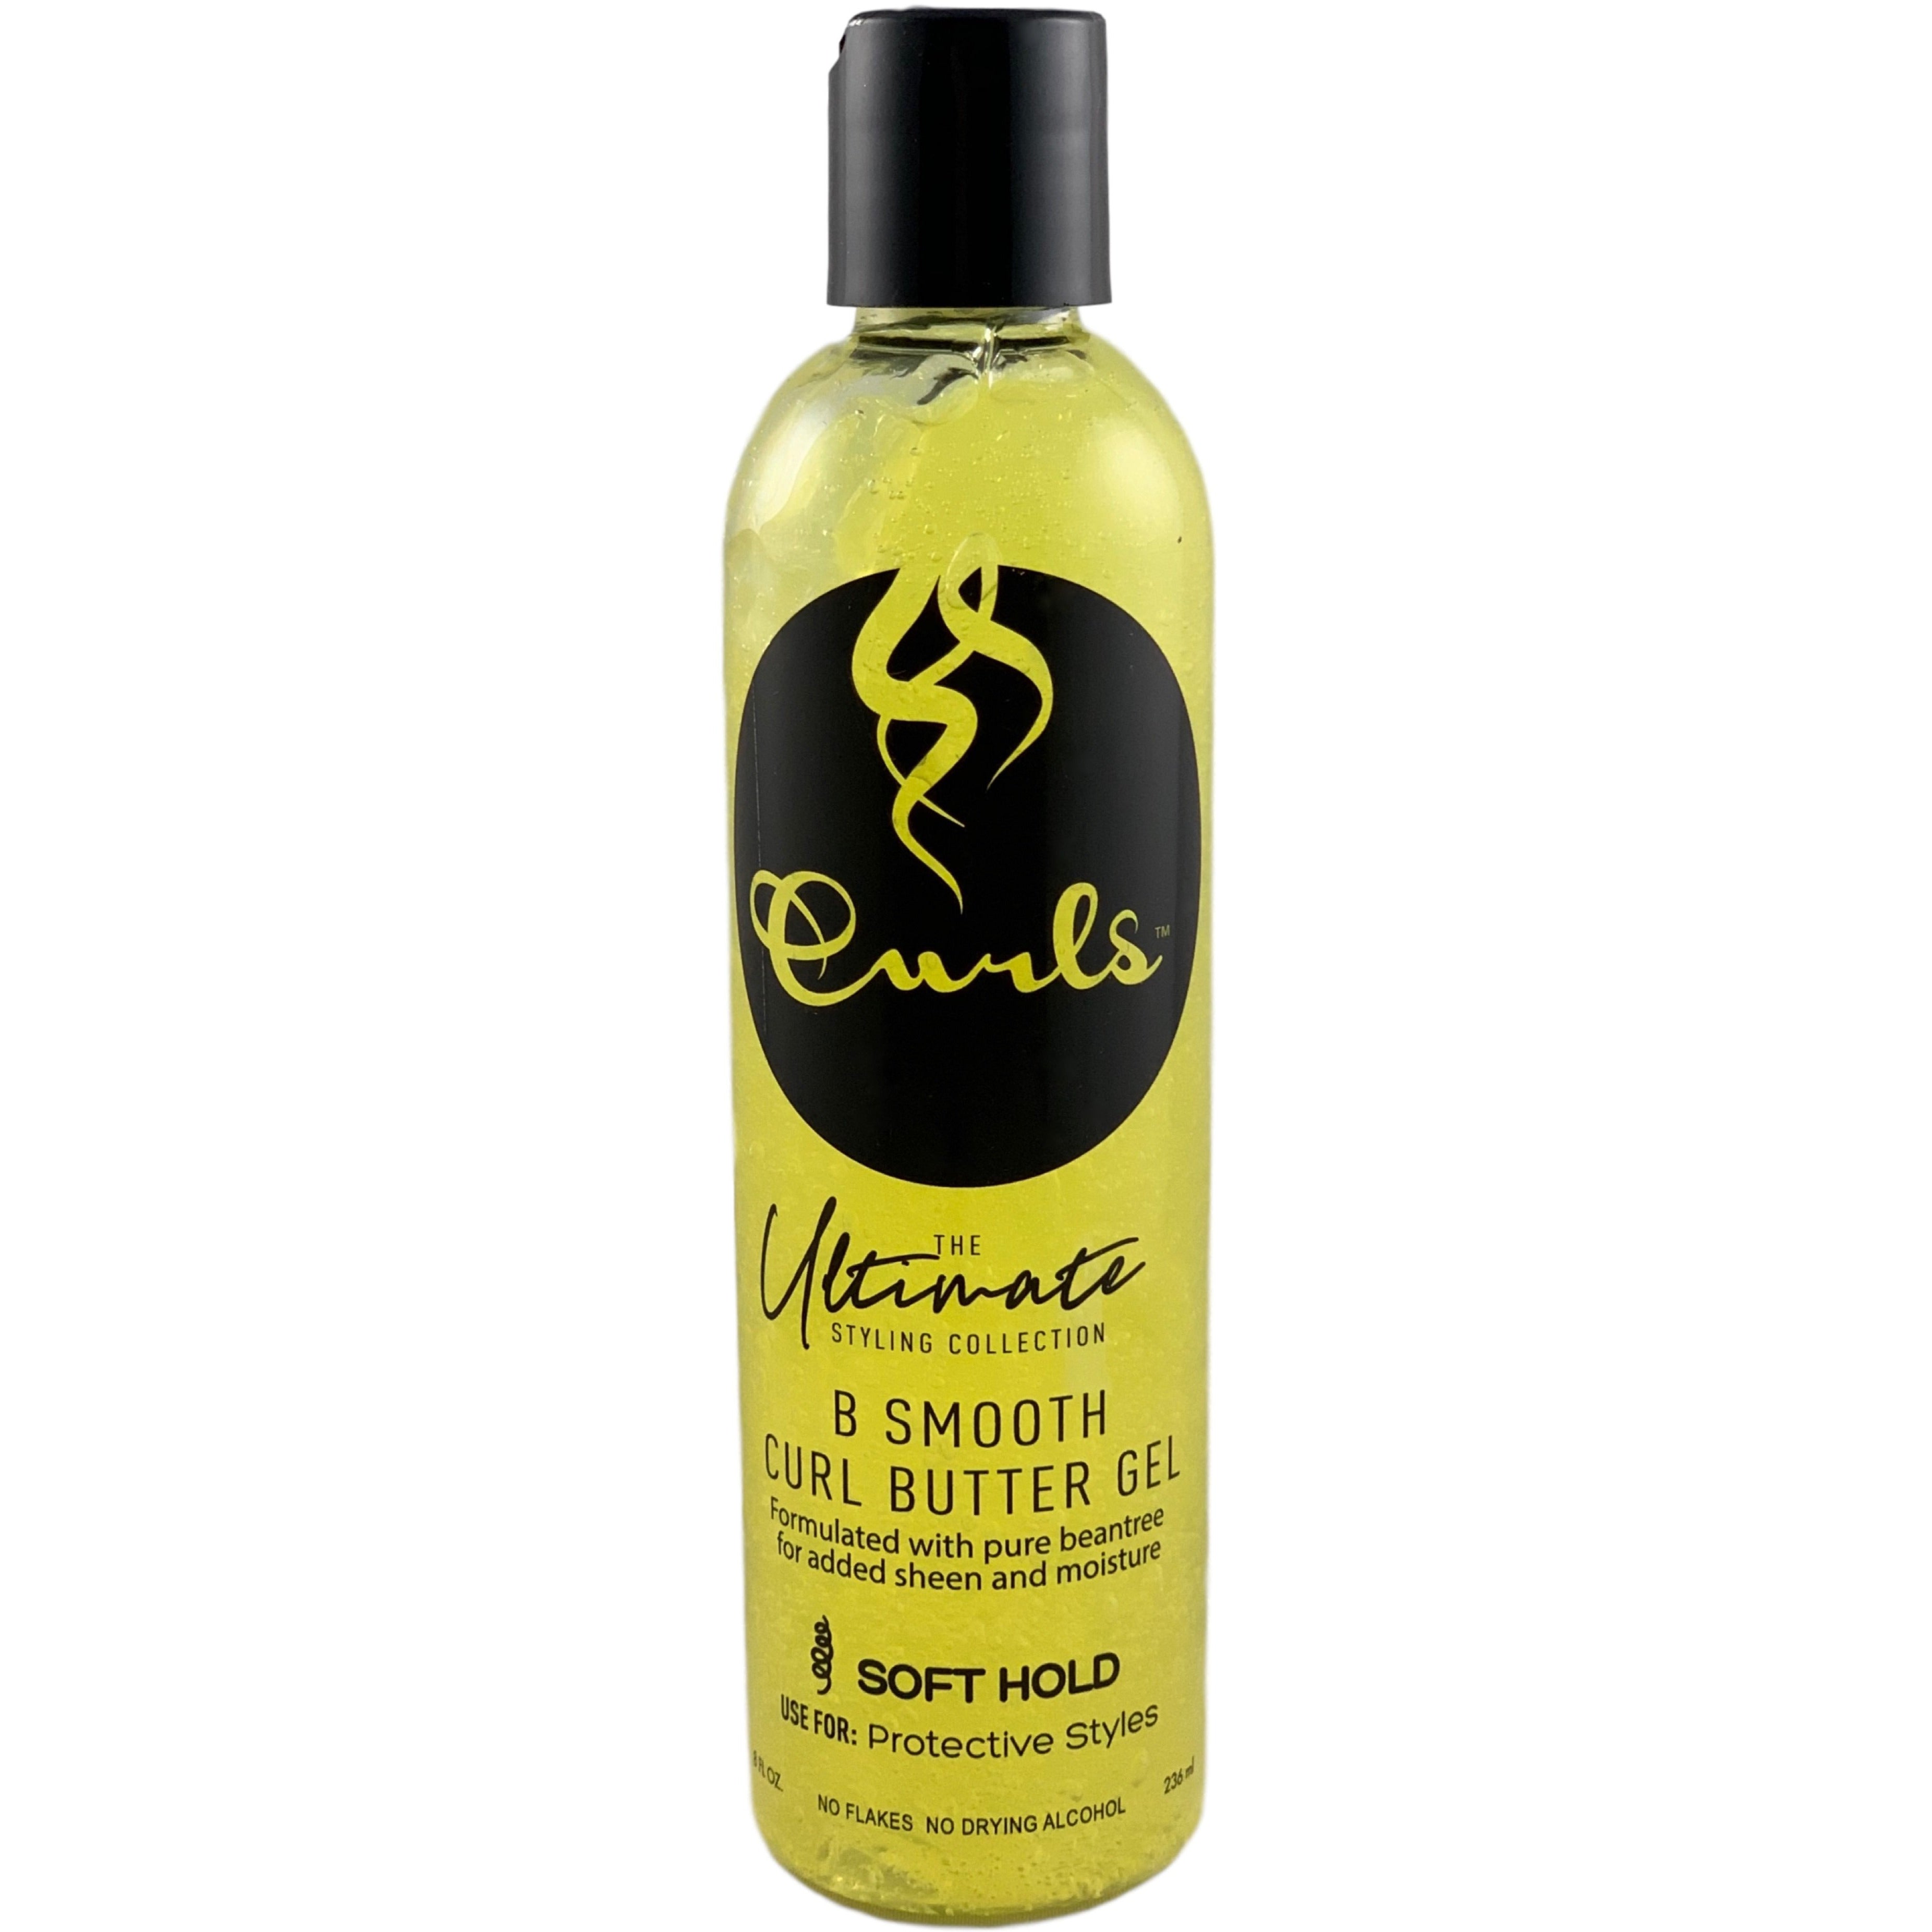 4th Ave Market: Curls Smooth Curl Butter Gel - 8 Oz